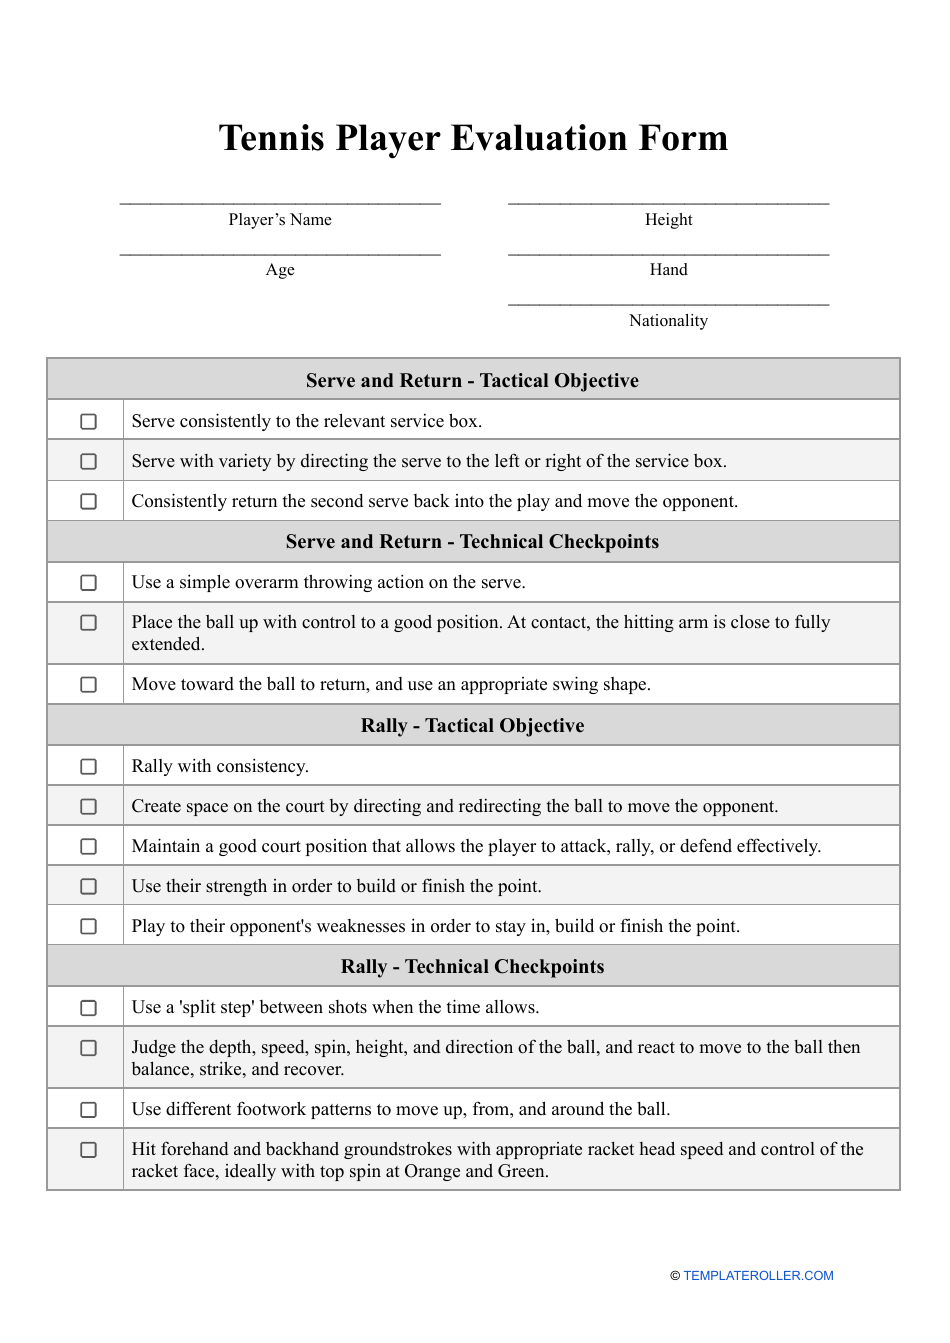 Tennis Player Evaluation Form, Page 1